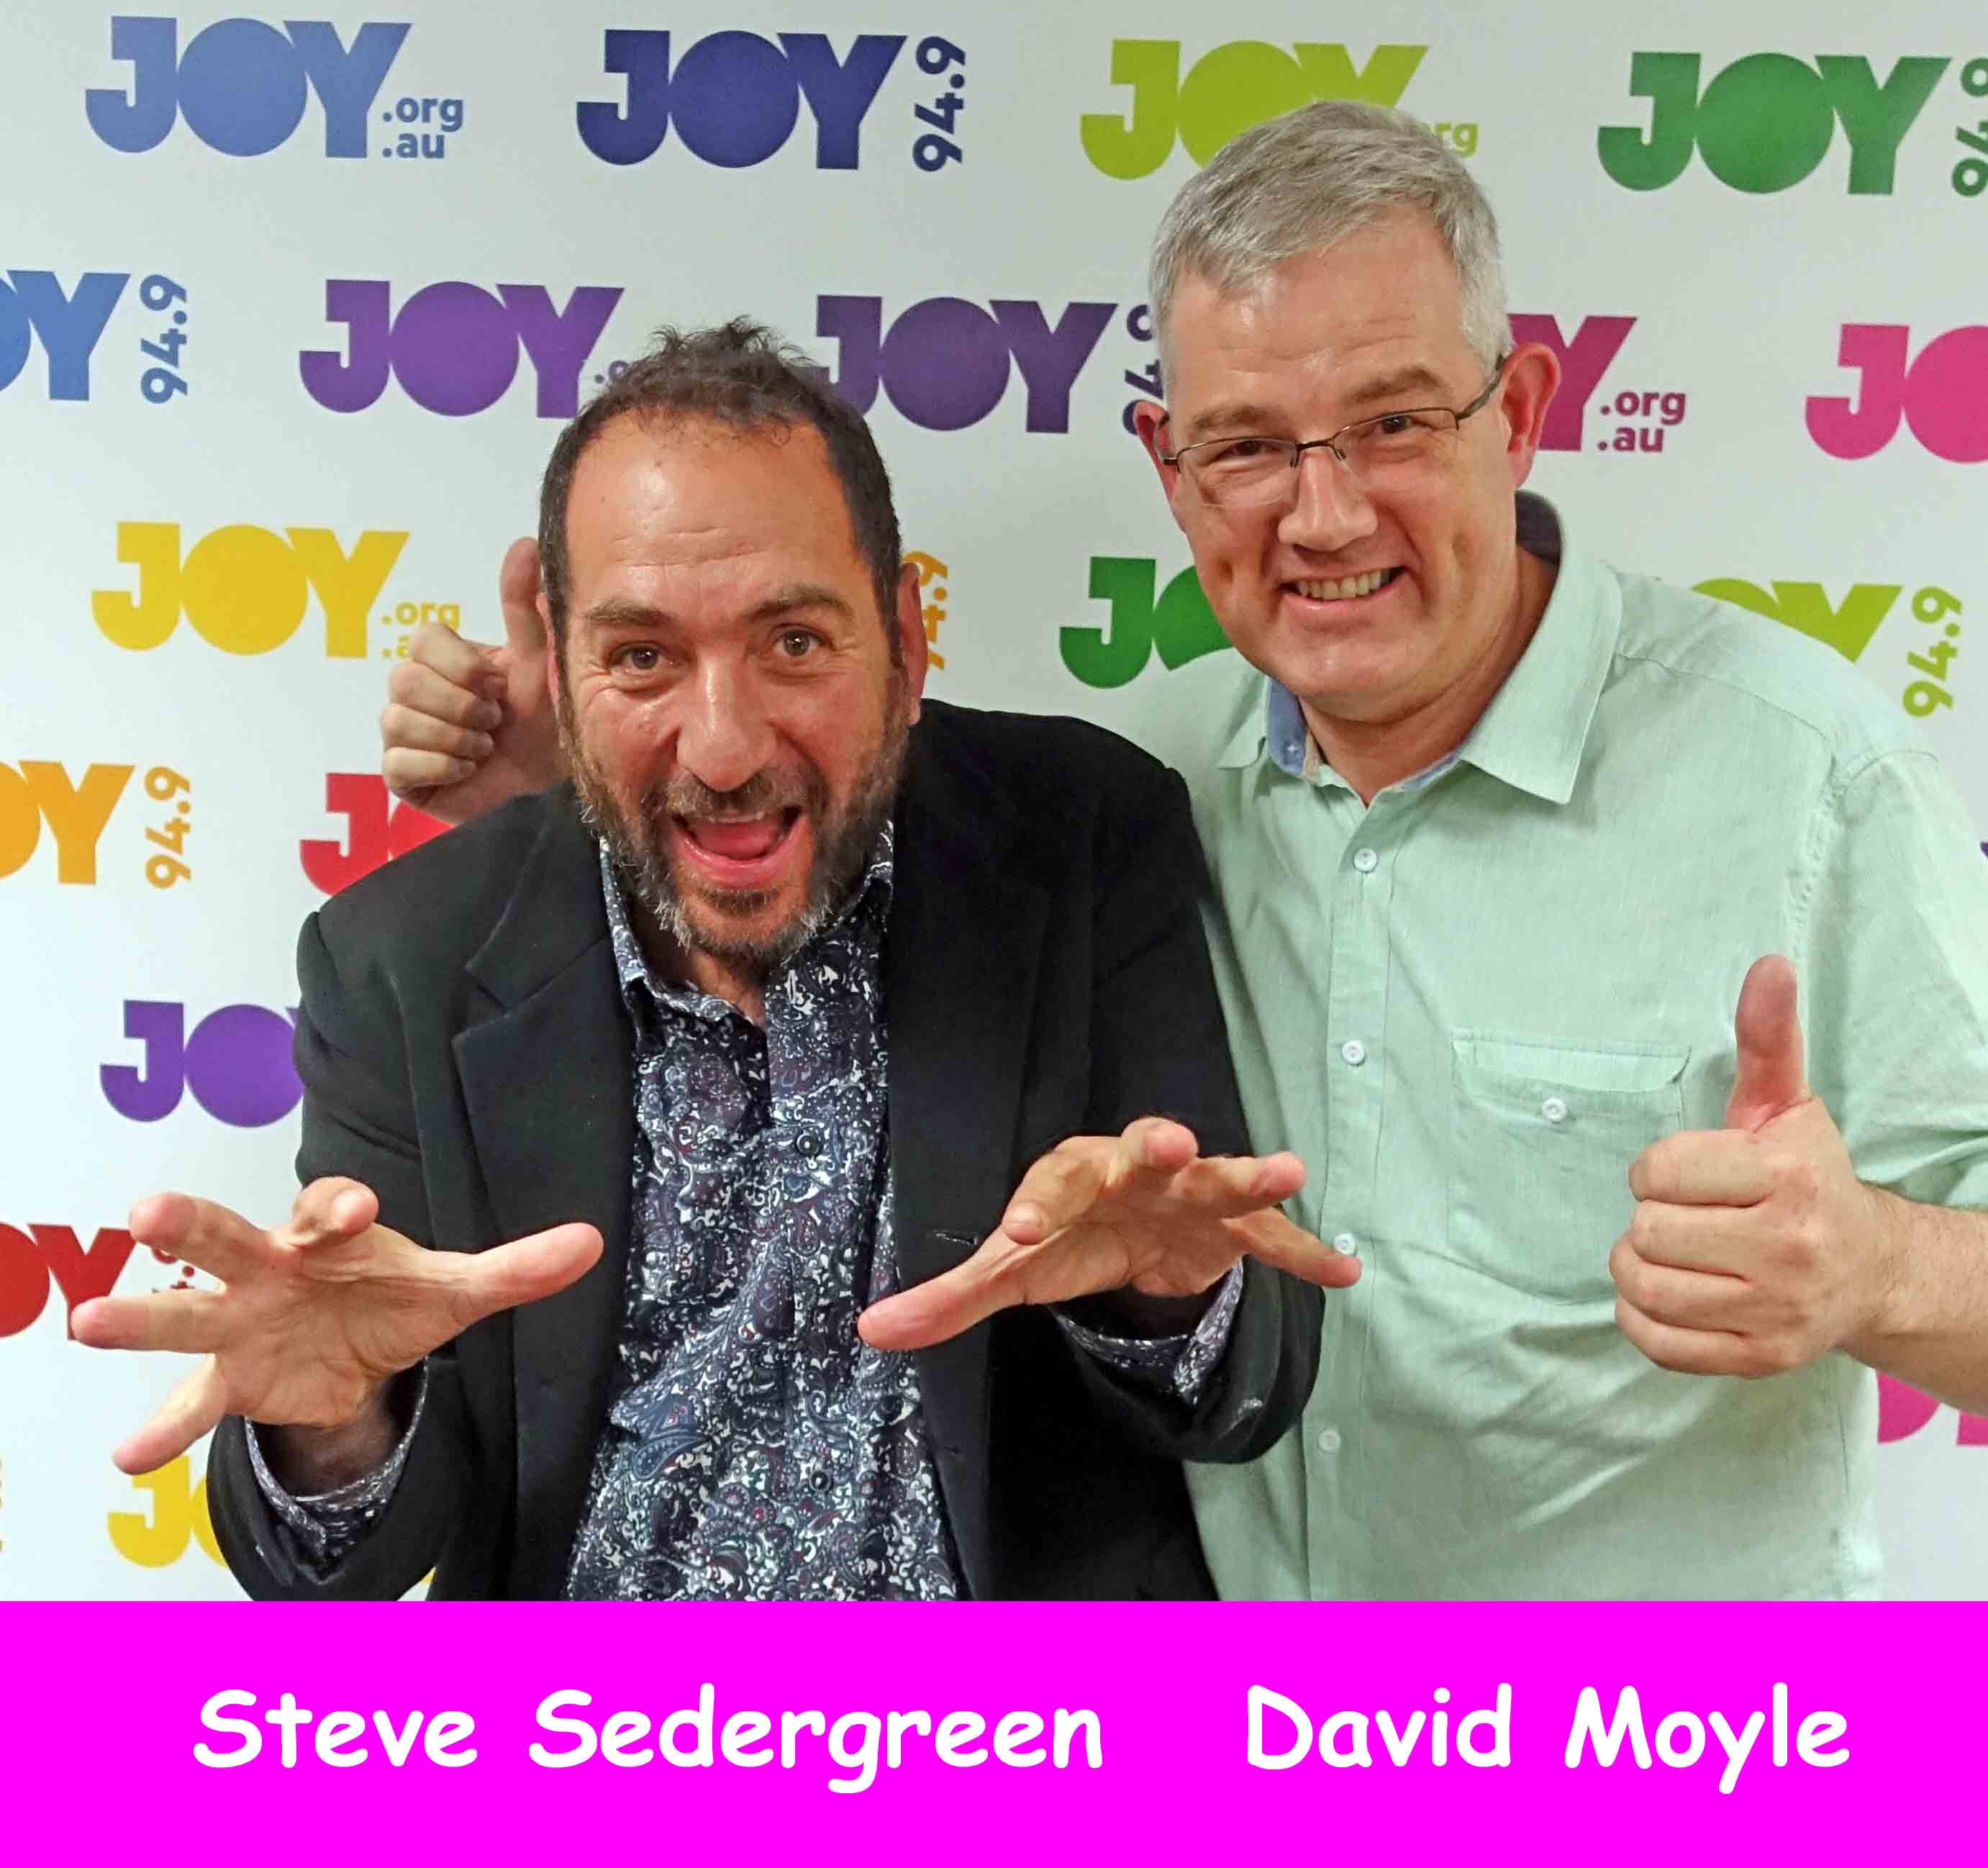 Steve Sedergreen – Here and Now!